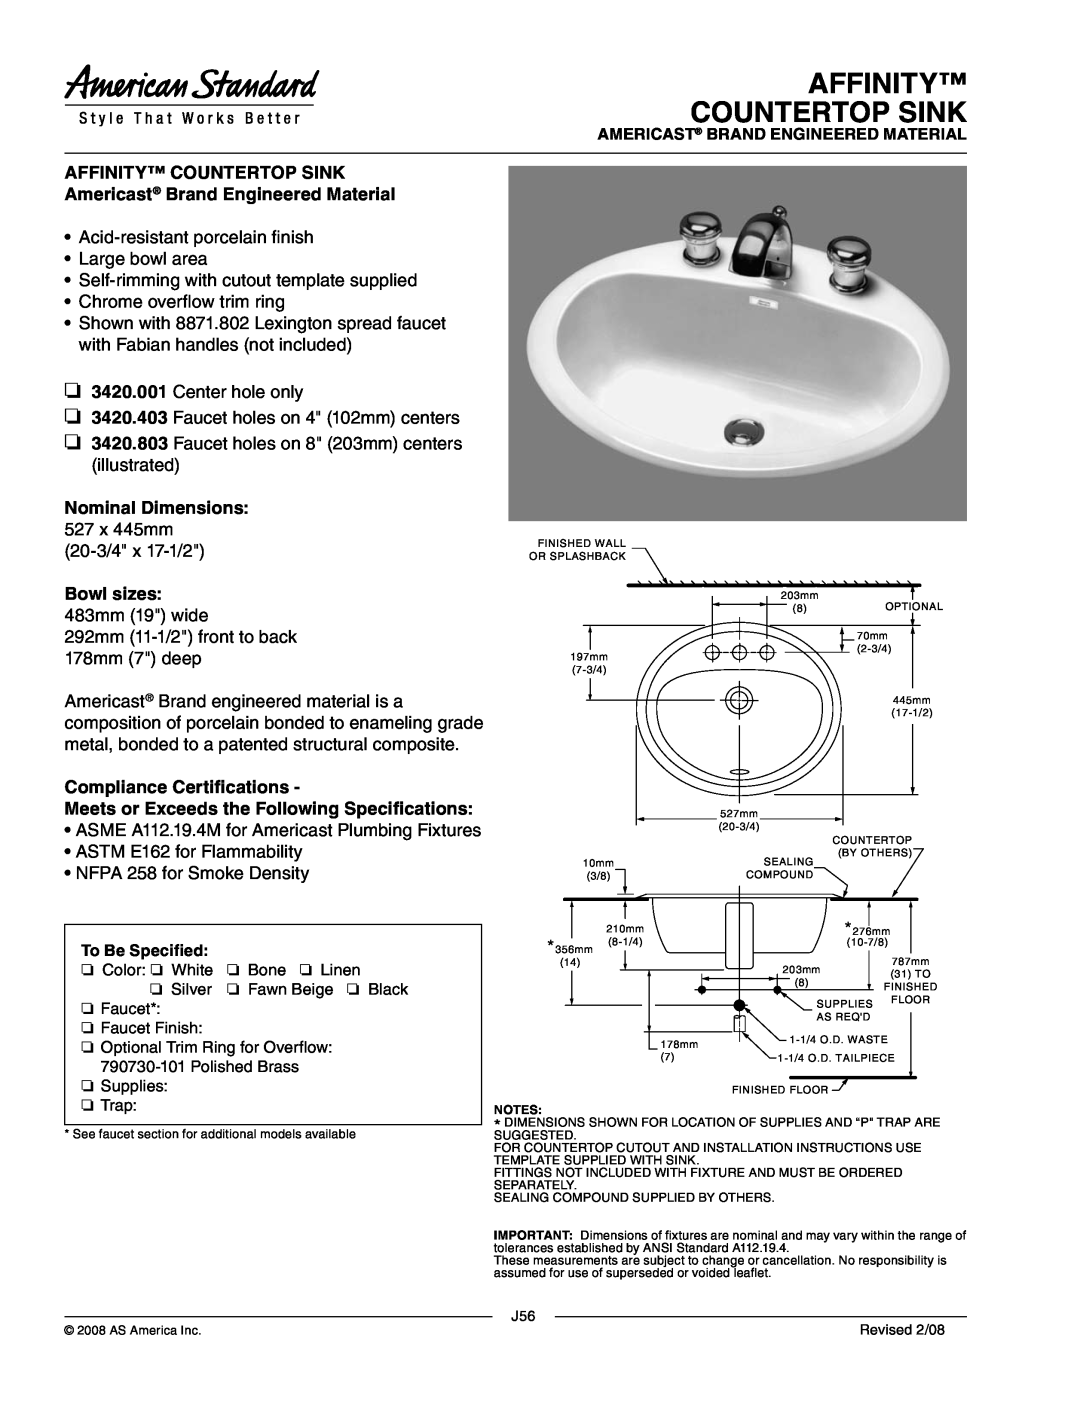 American Standard 3420.403, 3420.803 dimensions Affinity Countertop Sink, Americast Brand Engineered Material, Bowl sizes 